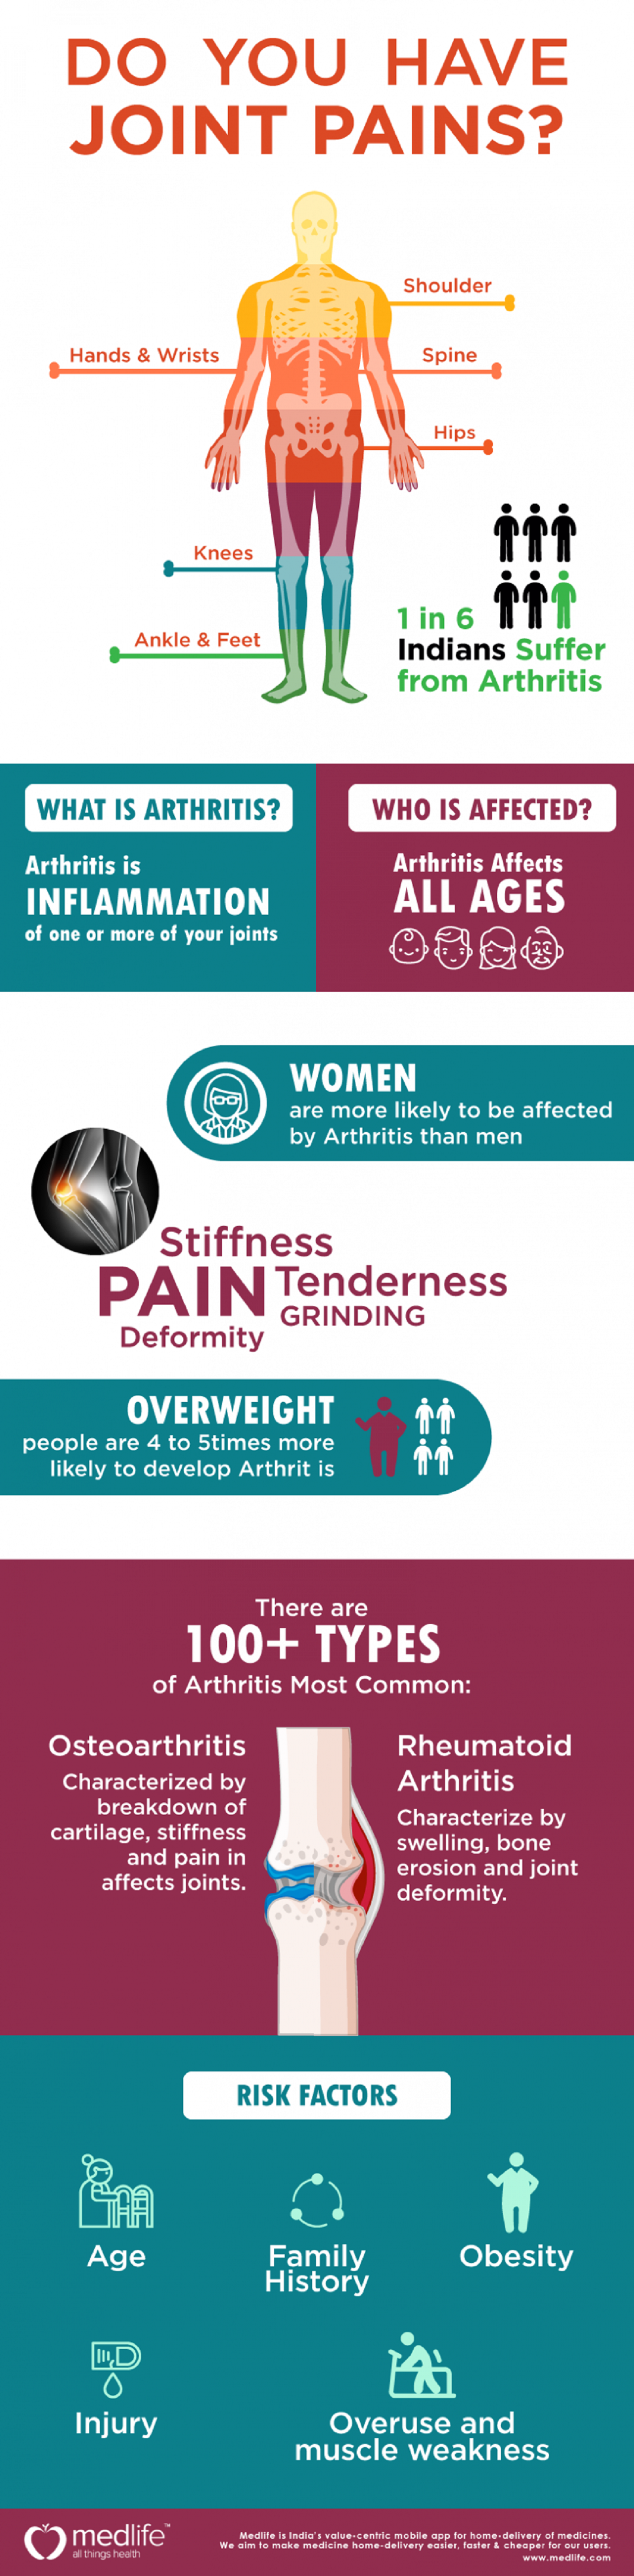 Do you have Joint Pains? [Arthritis] #infographic